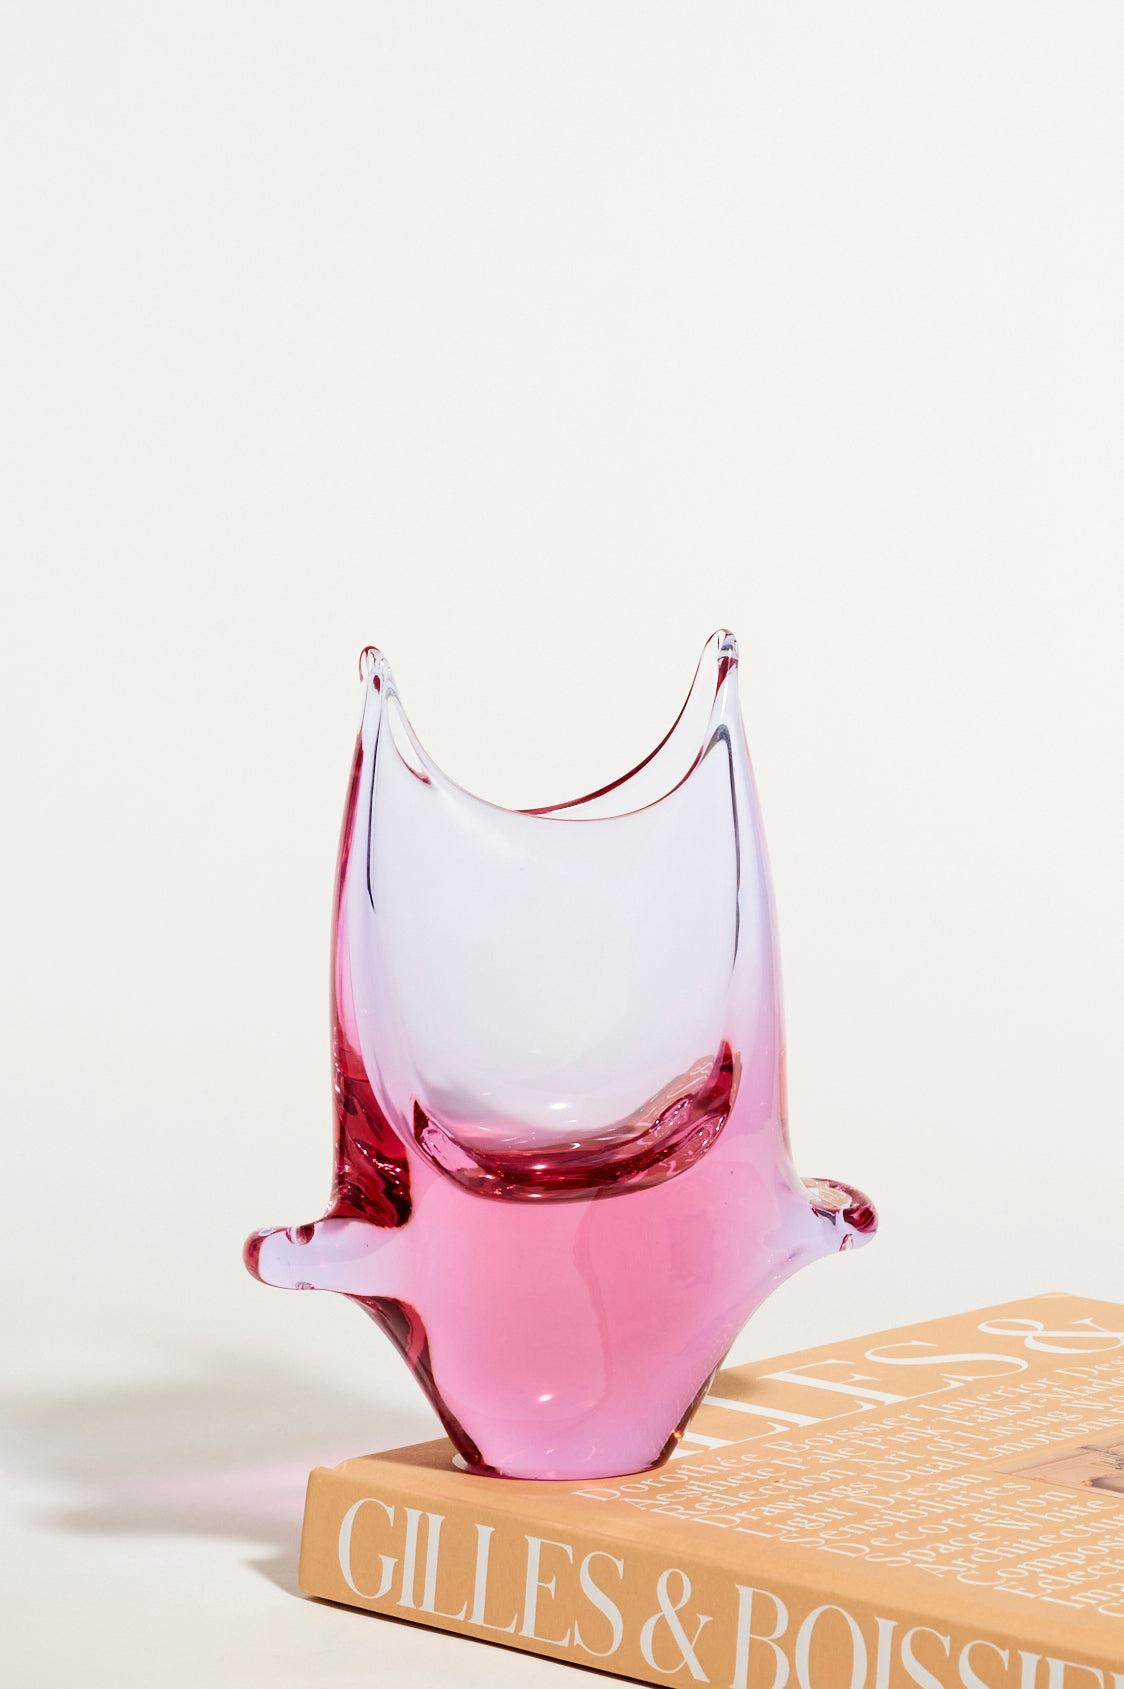 Translucent lilac/pink vase in an interesting abstract shape.